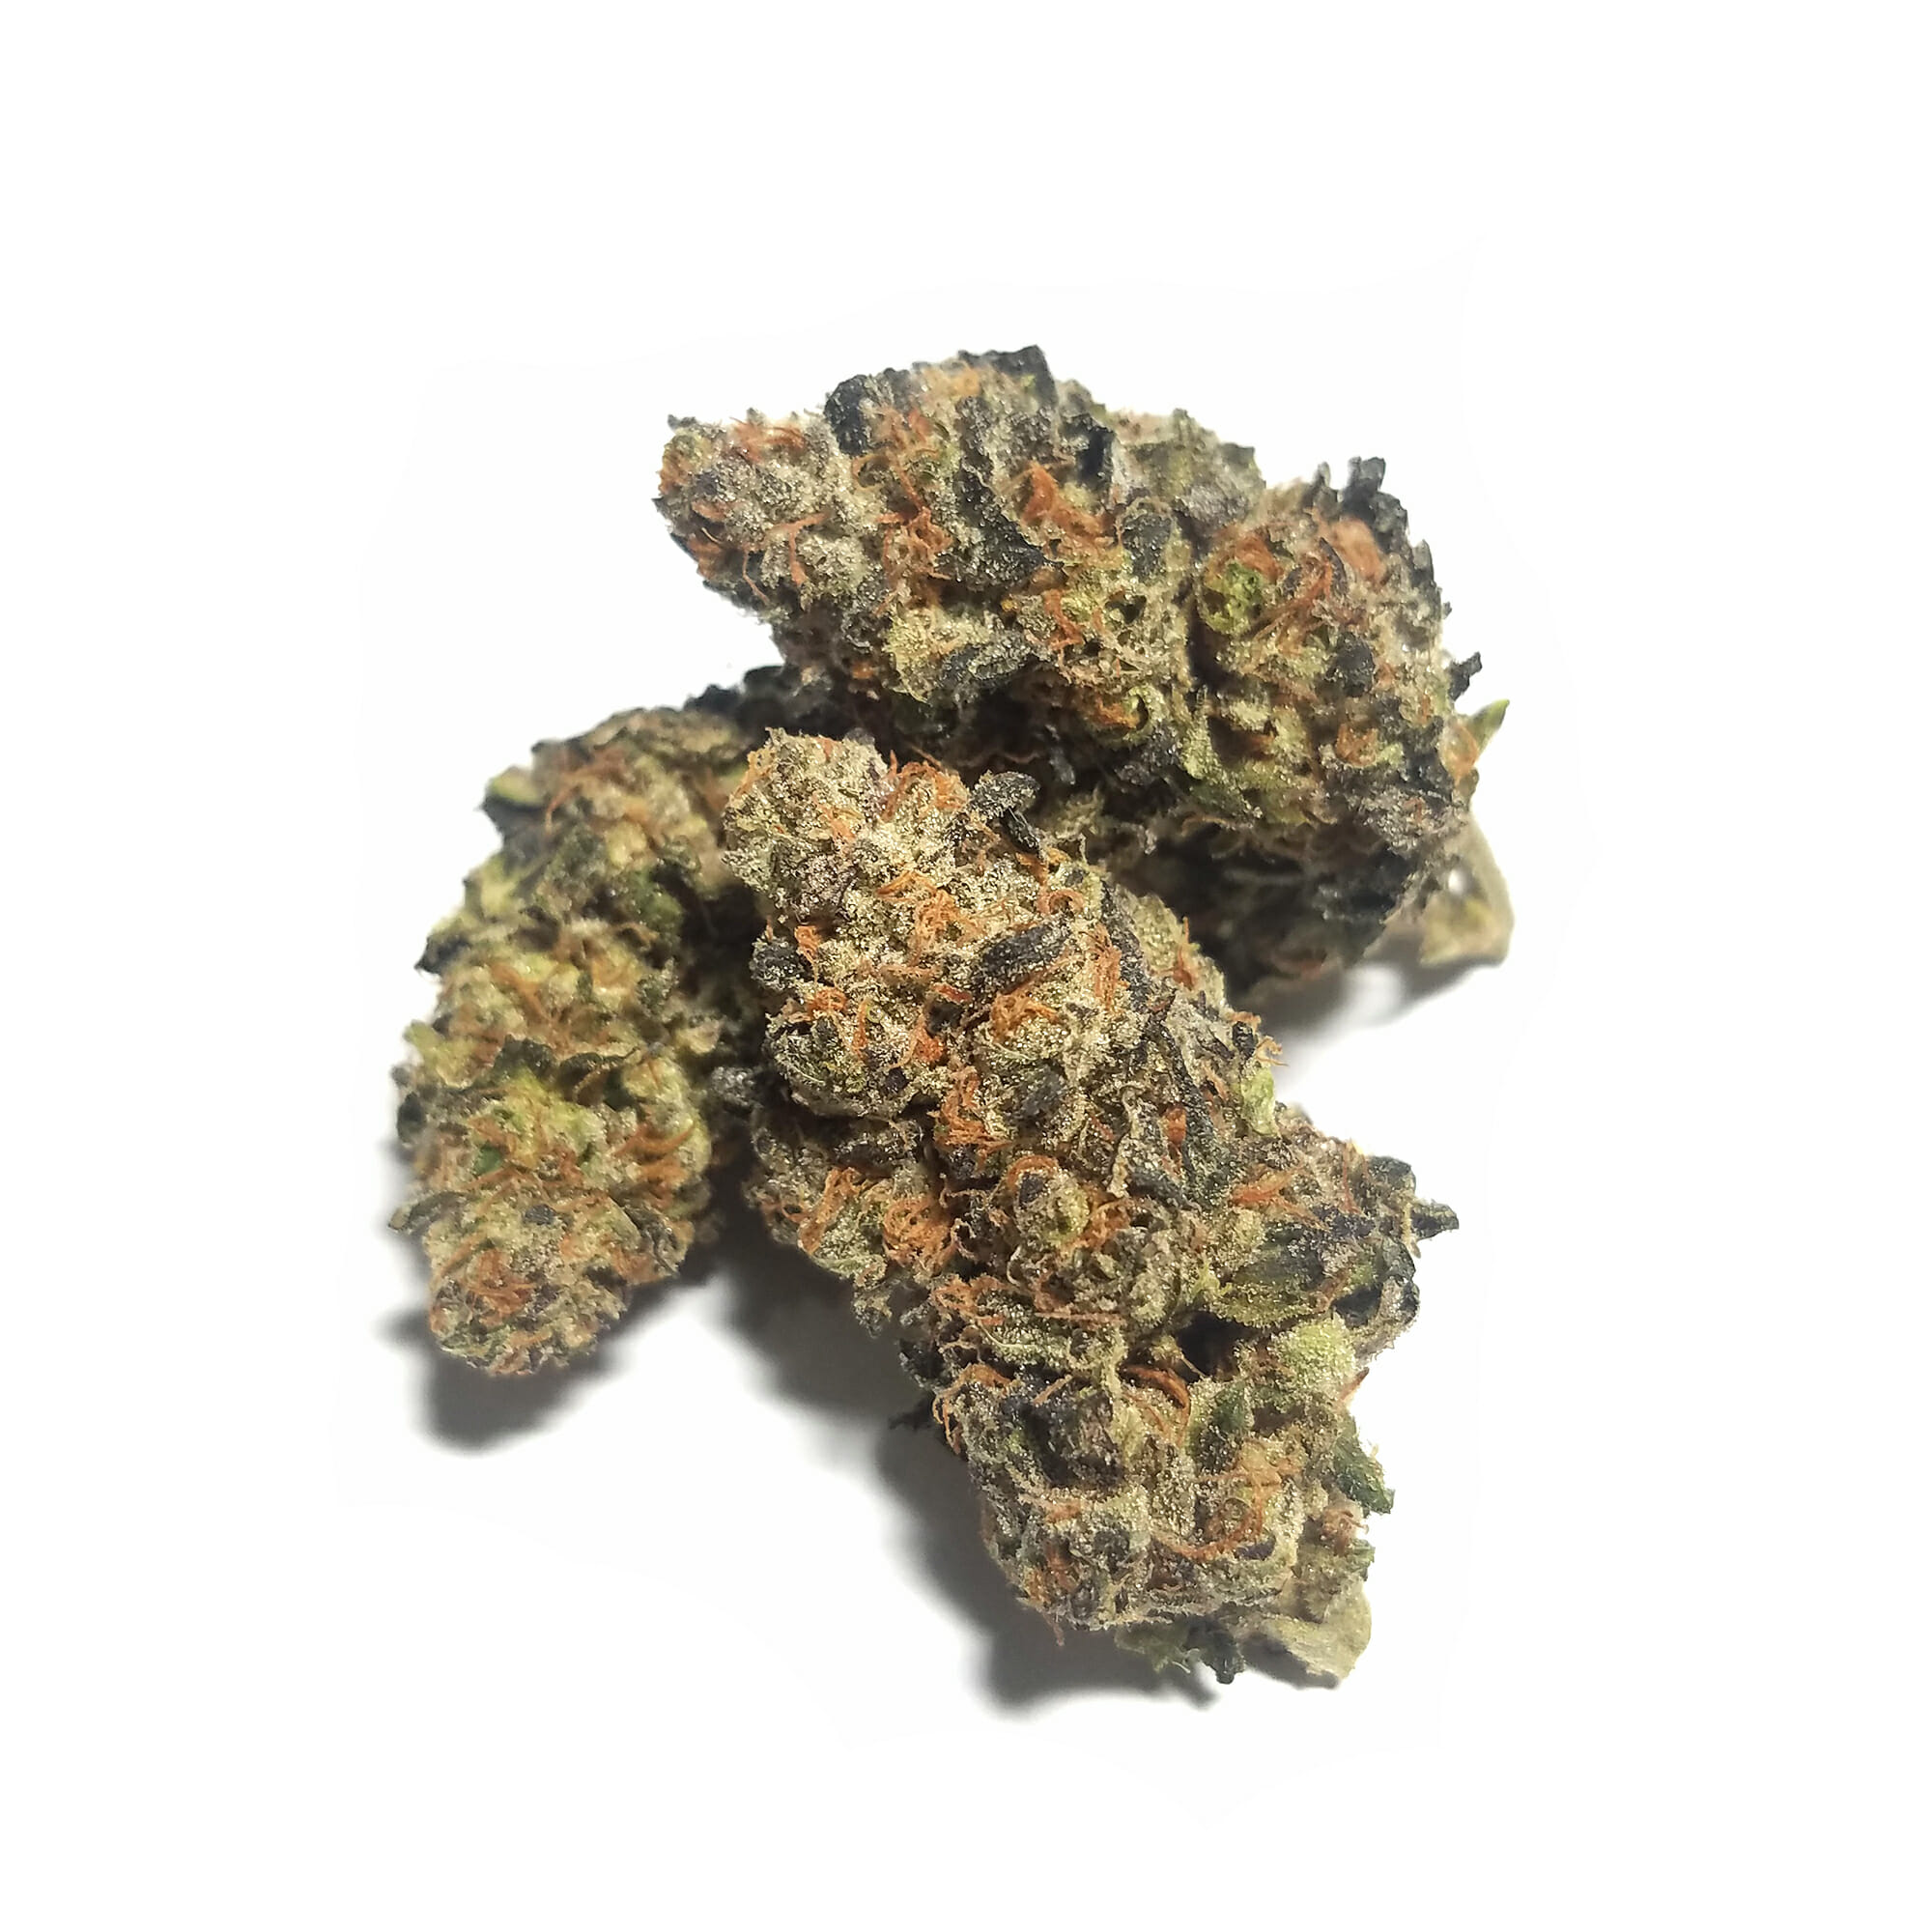 Best-selling pot seeds Peanut Butter Breath feminized fragrance and aroma